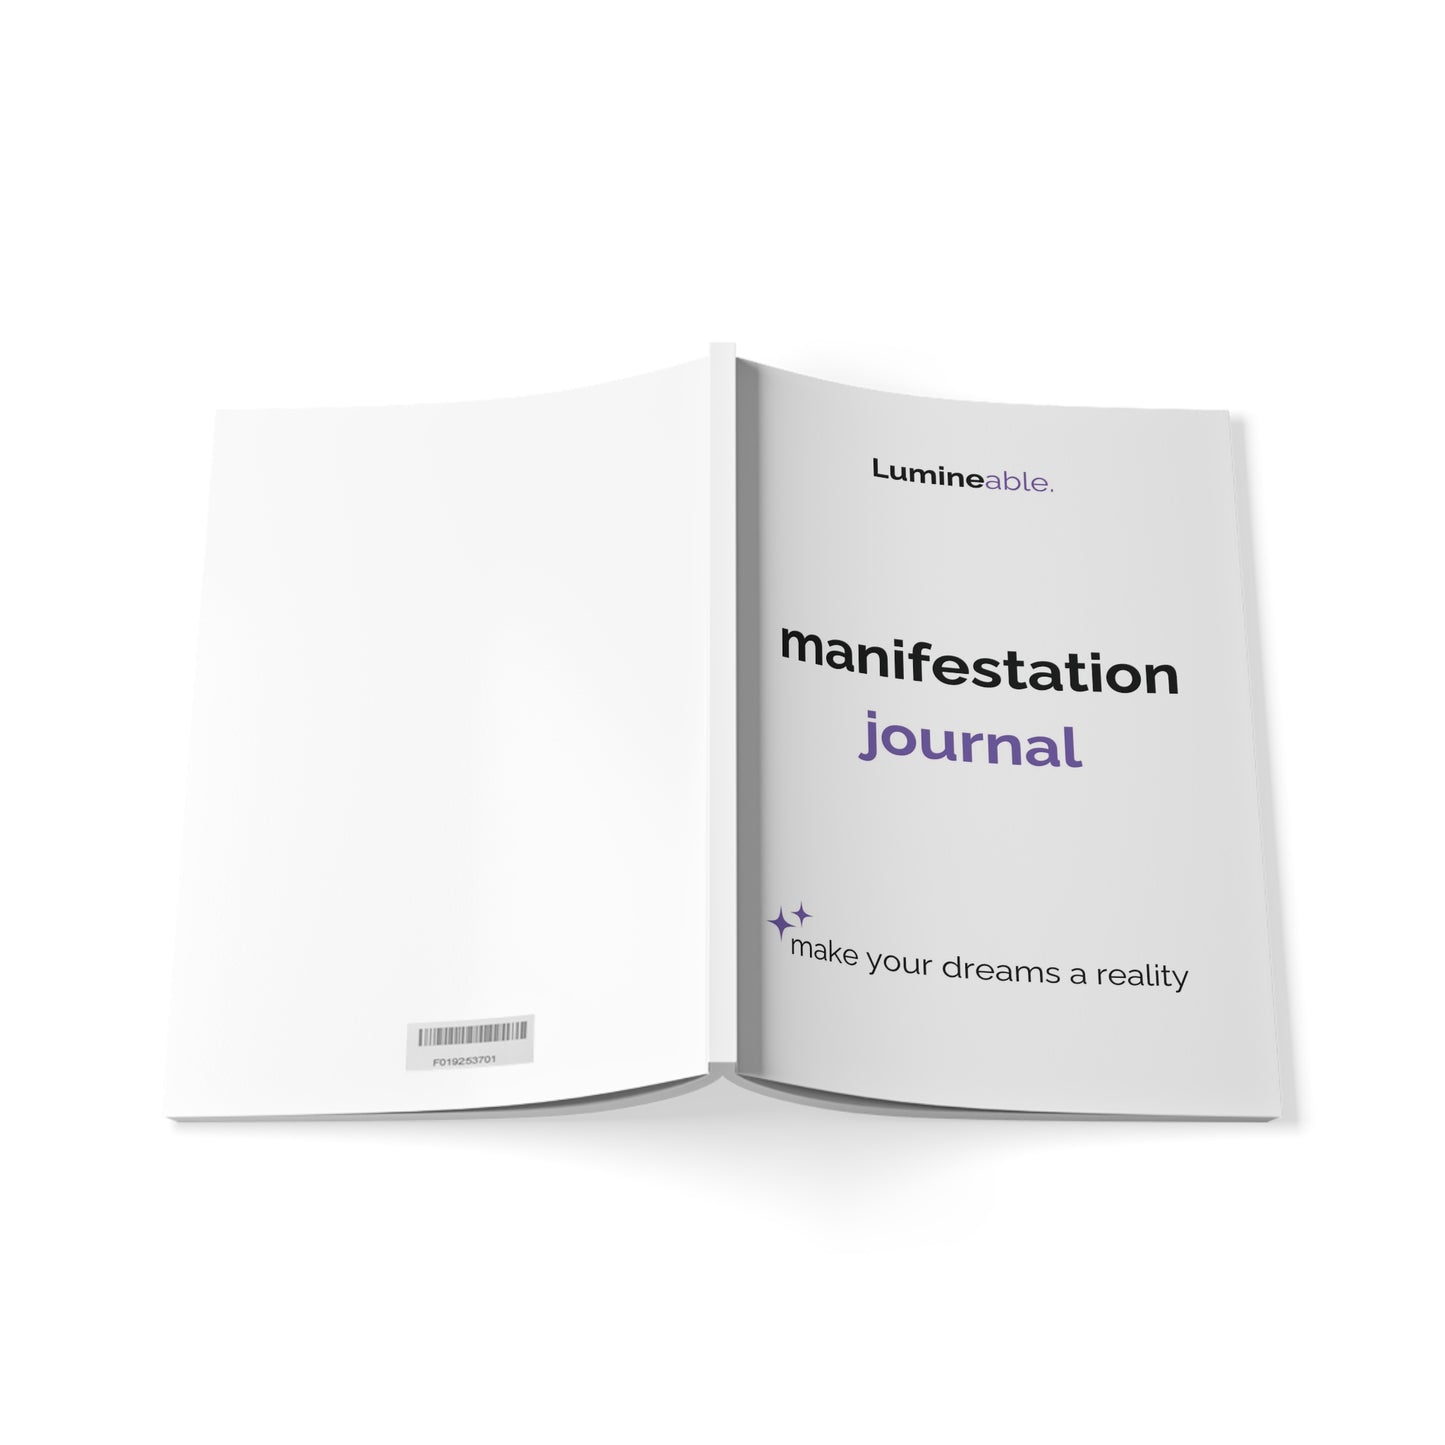 Lumineable Manifestation Journal "Make Your Dreams A Reality."